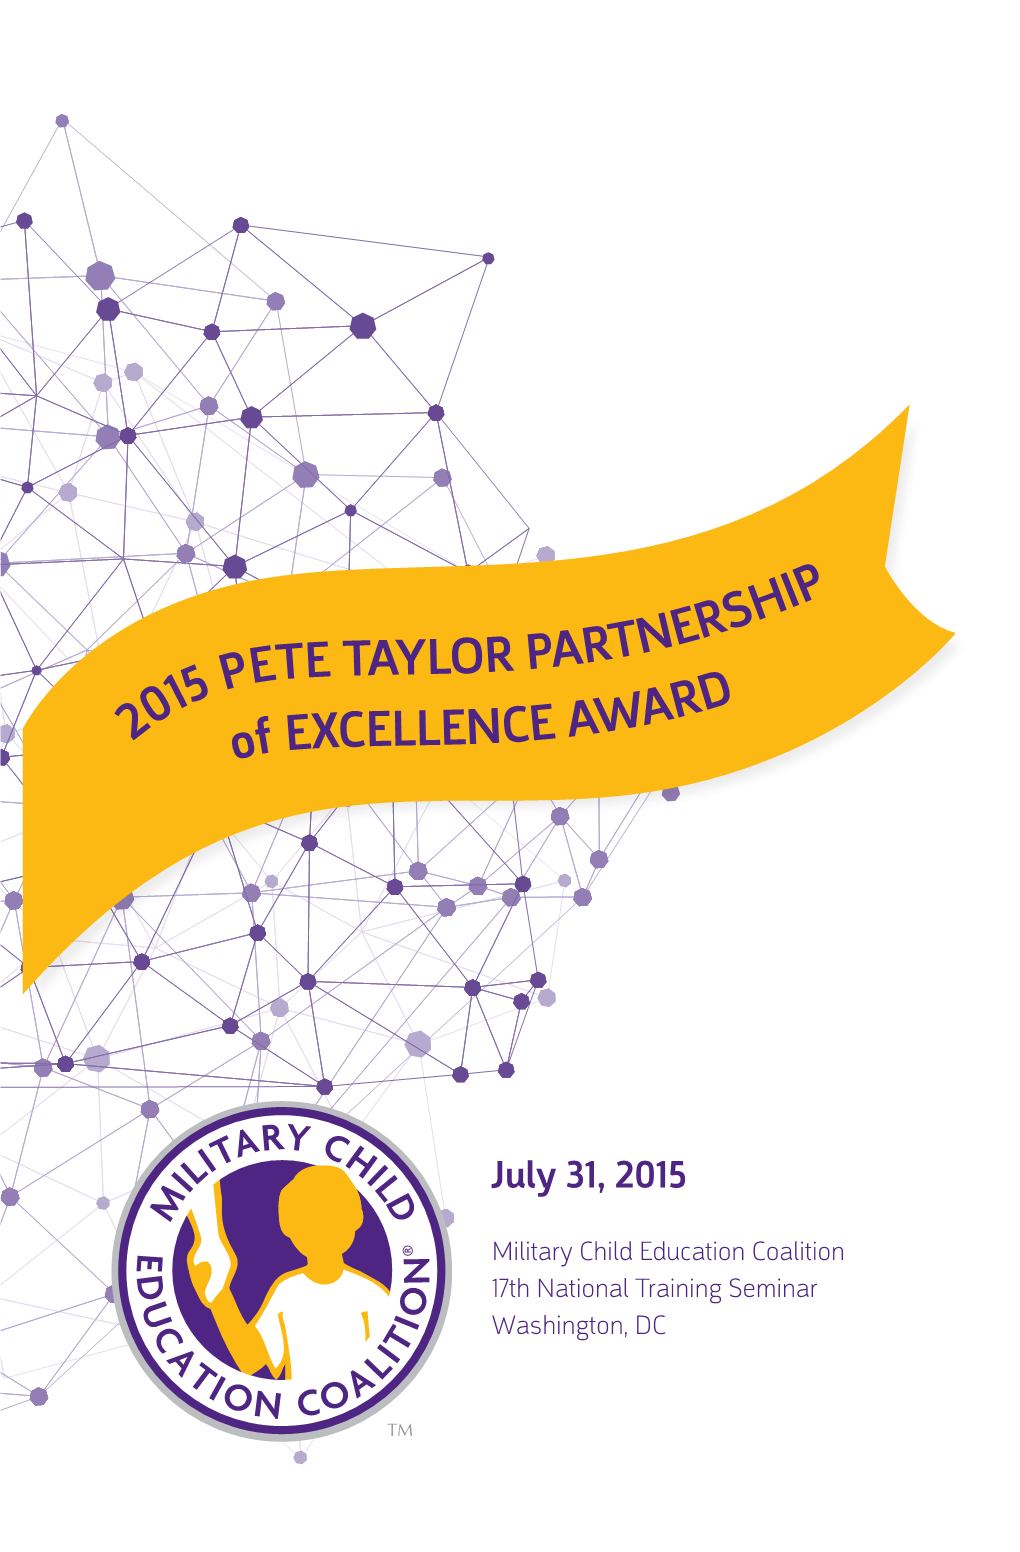 2015 PETE TAYLOR PARTNERSHIP of EXCELLENCE AWARD